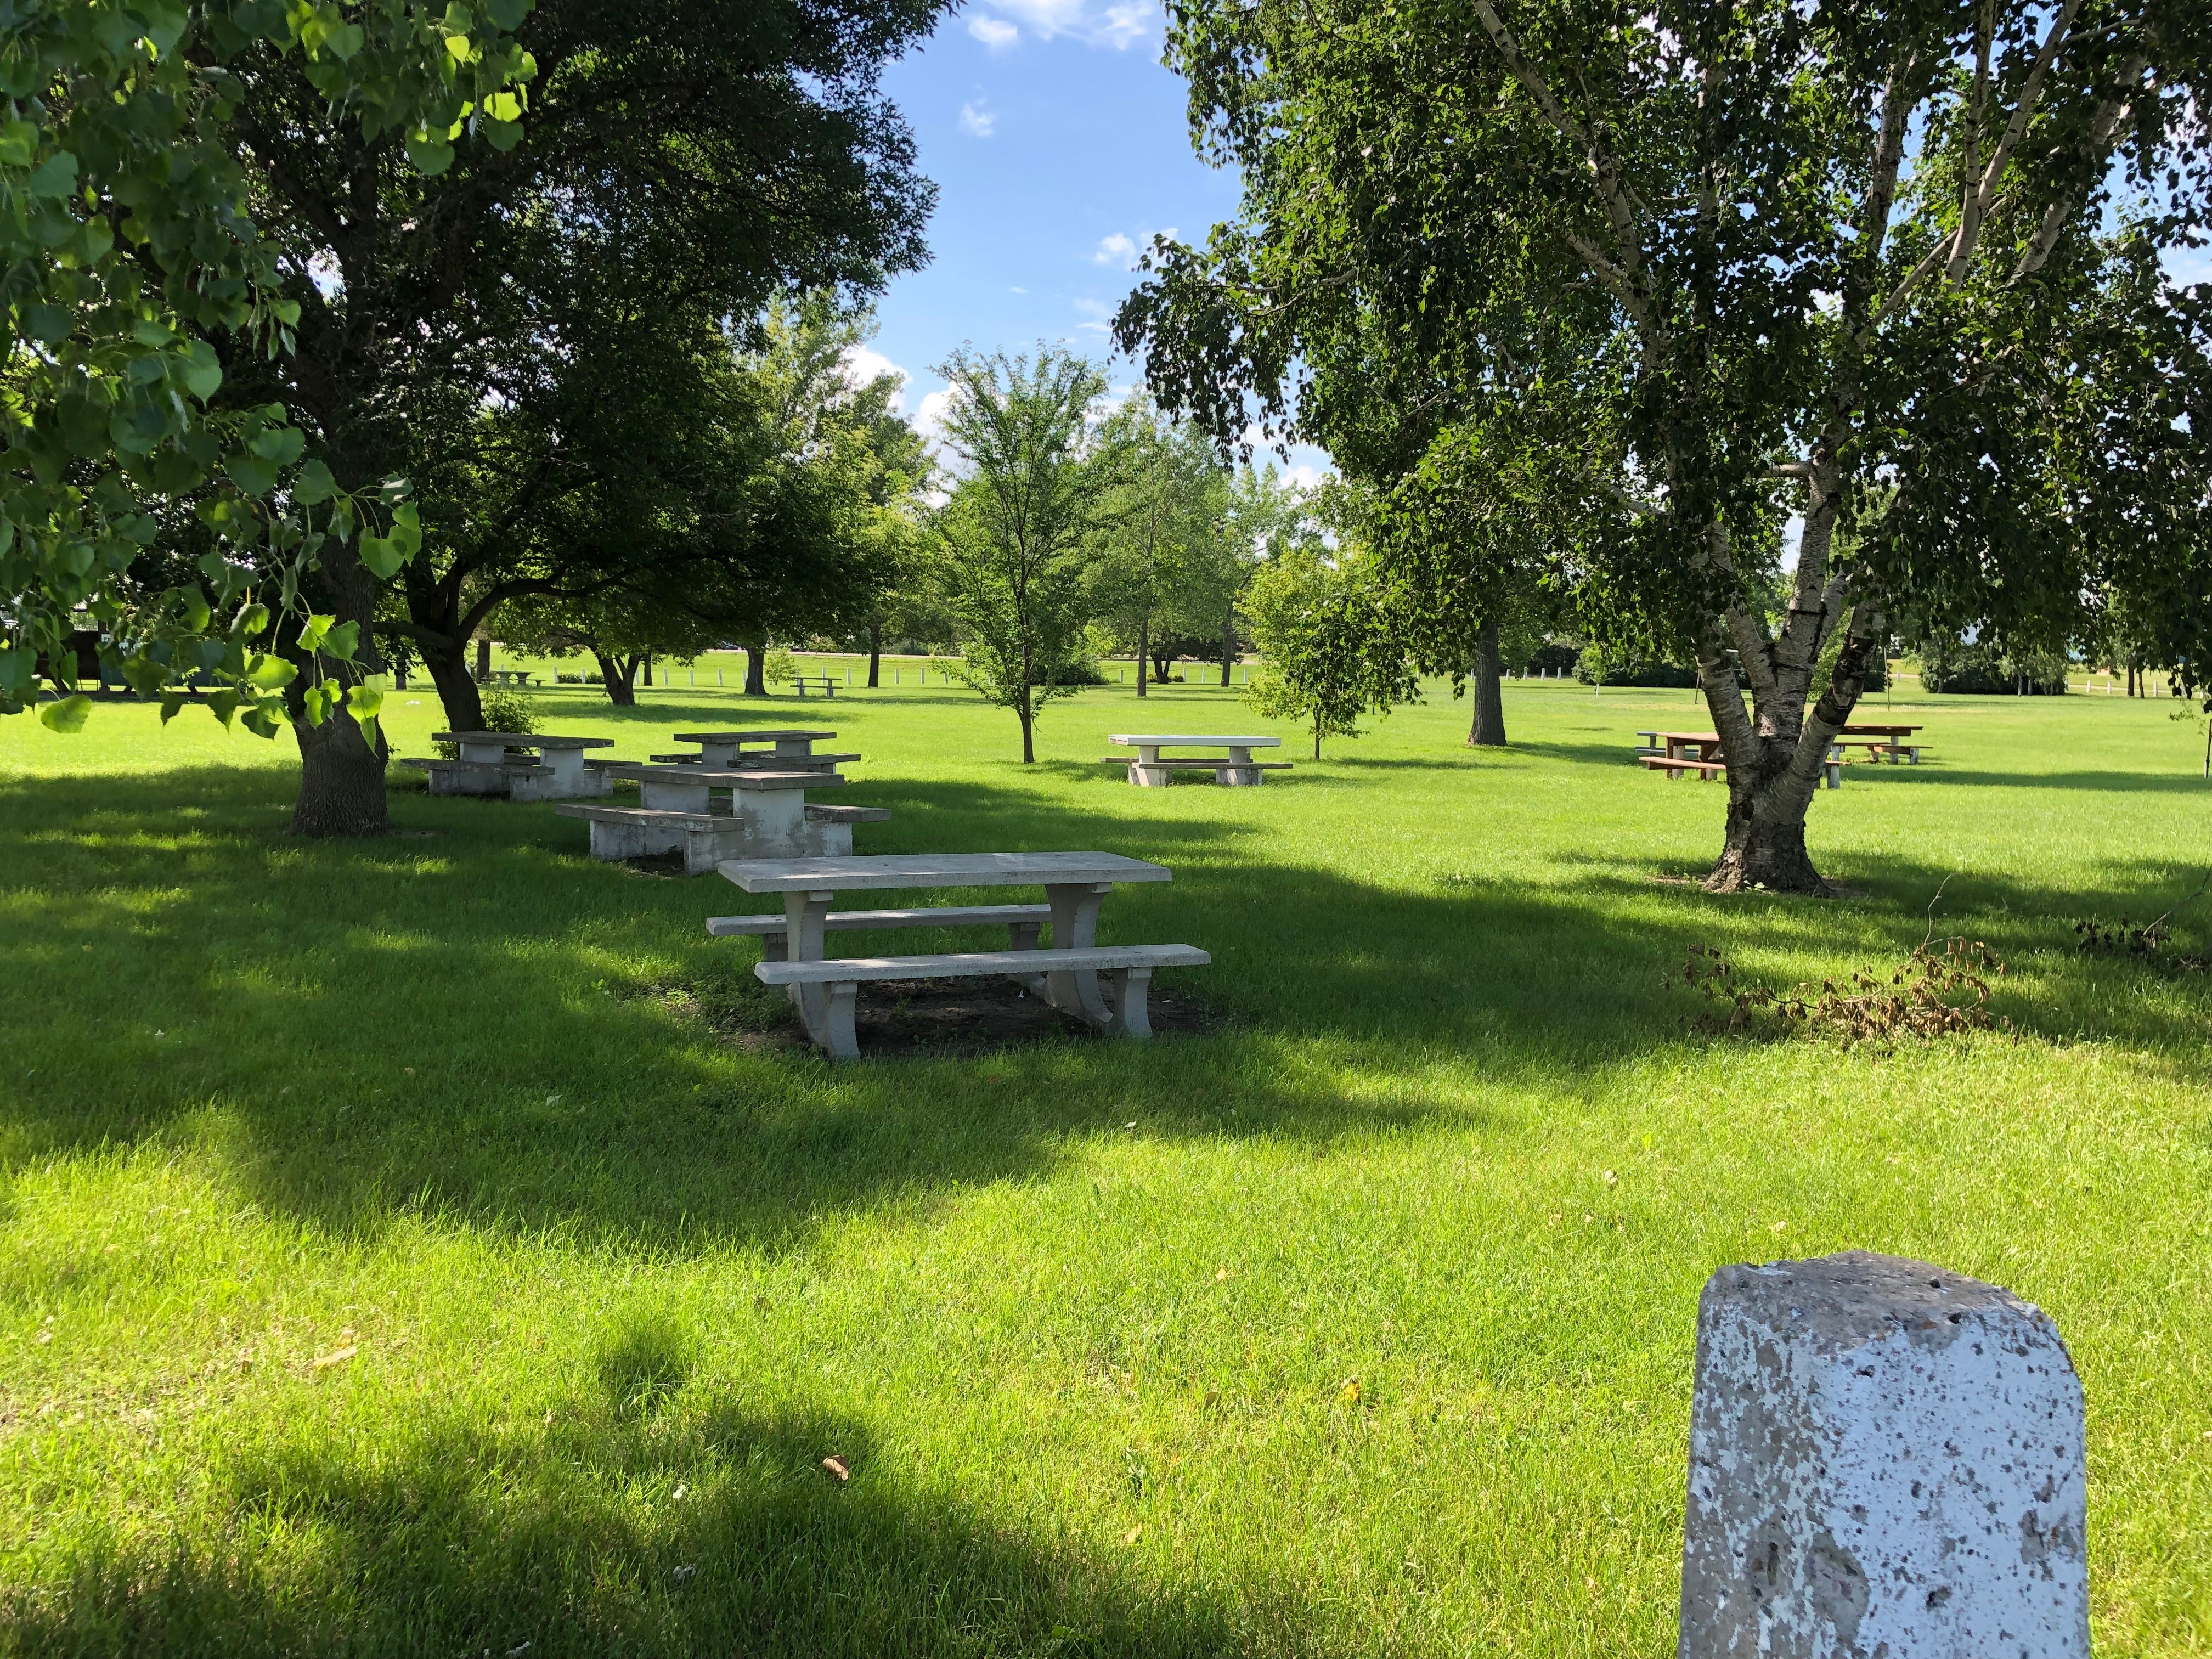 Large park with plenty of picnic room